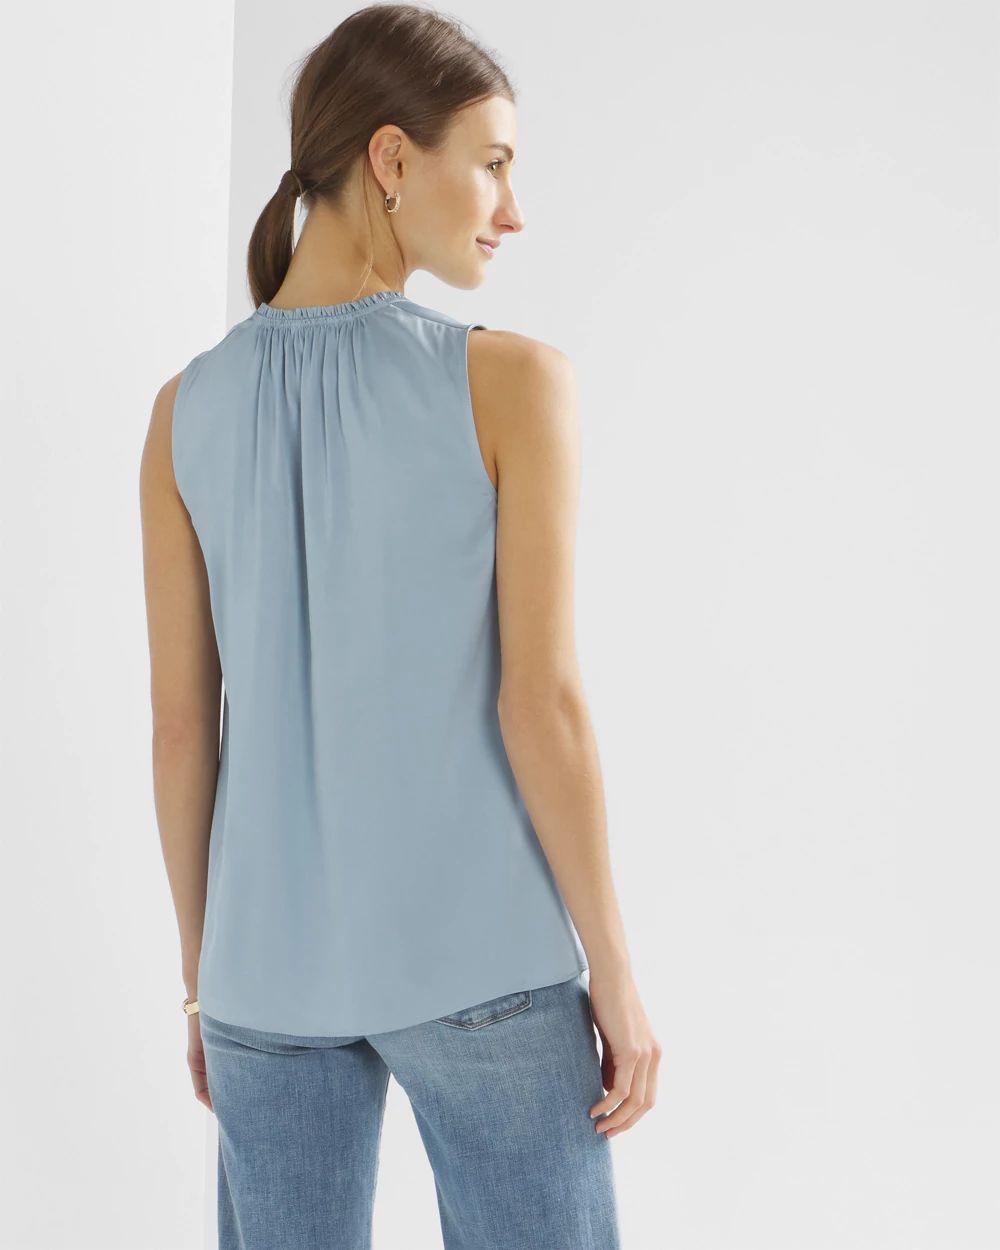 Sleeveless Ruched V-Neck Shell Top click to view larger image.